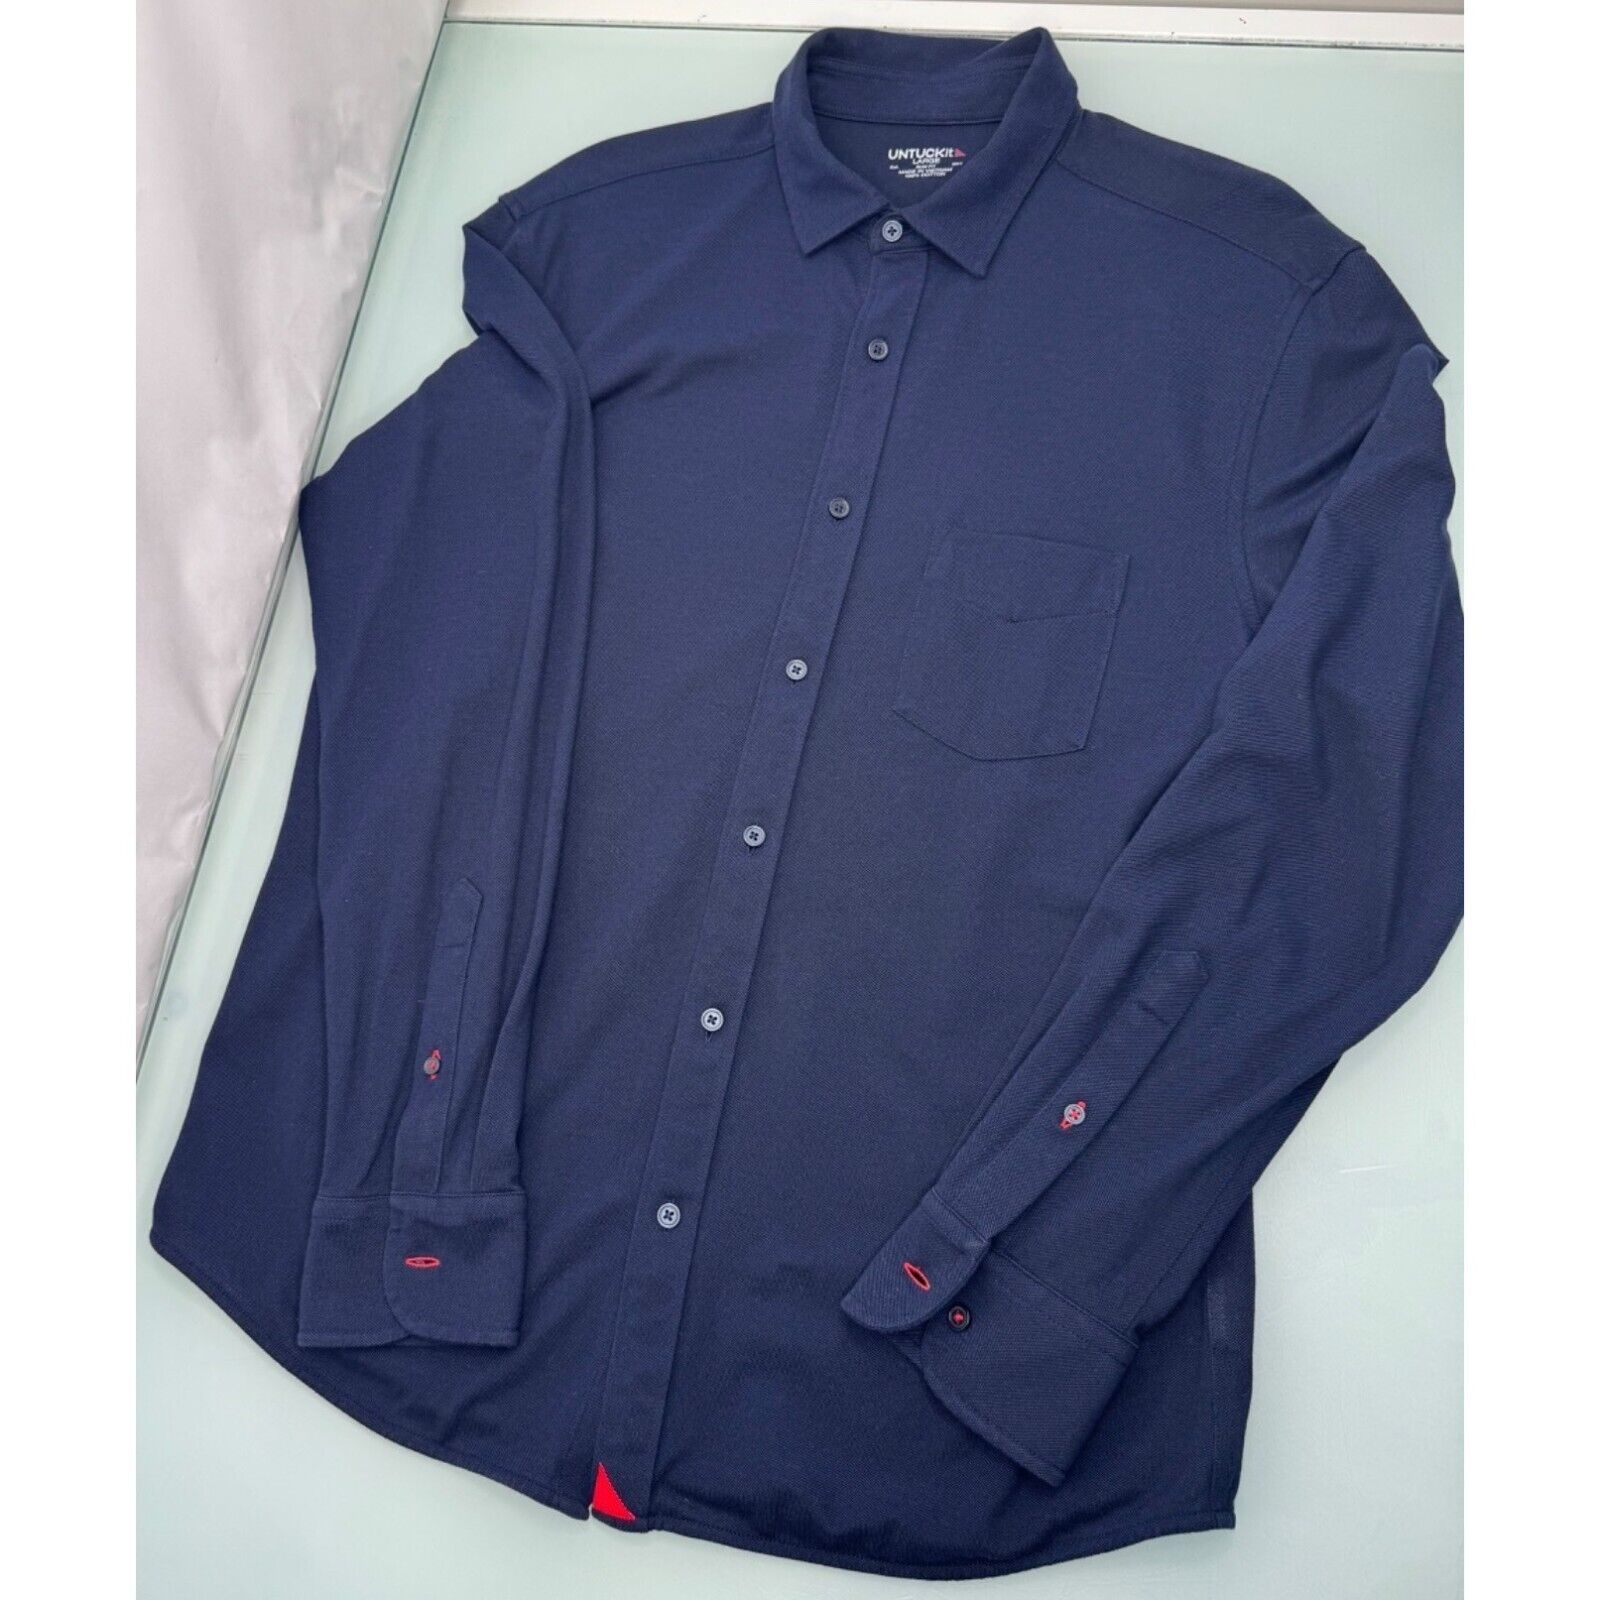 Primary image for Untuckit Knit Pique Shirt Men Button Up Long Sleeve Navy Blue Slim Fit Large L